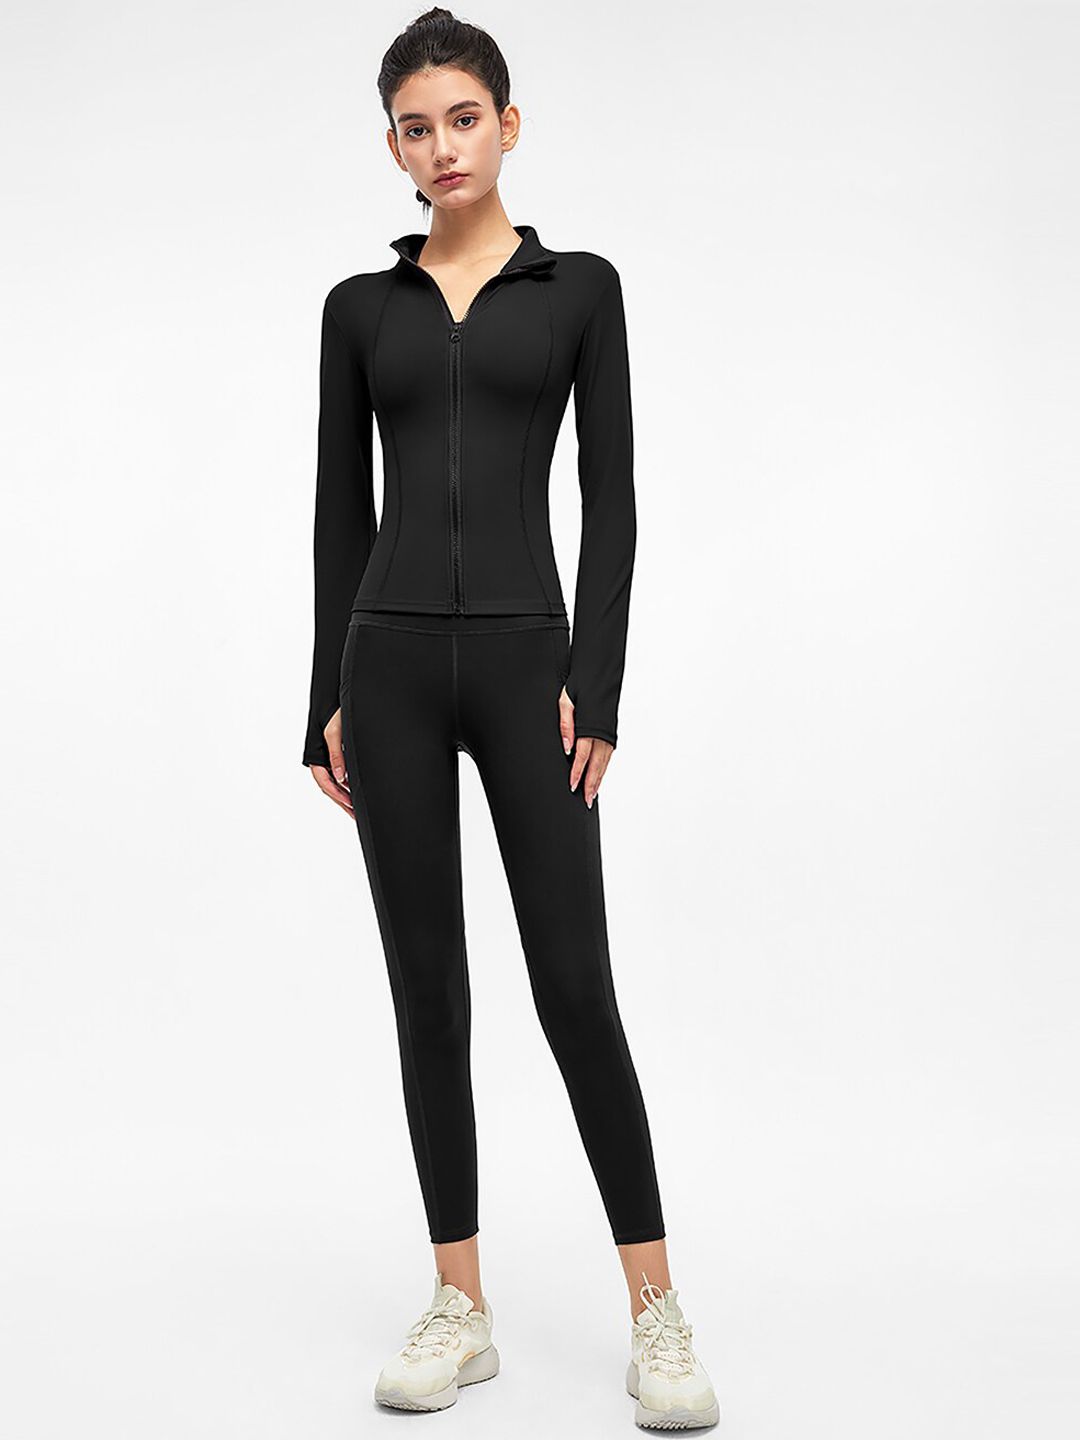 JC Collection Women Black Solid Sports Tracksuit With Jackets Price in India